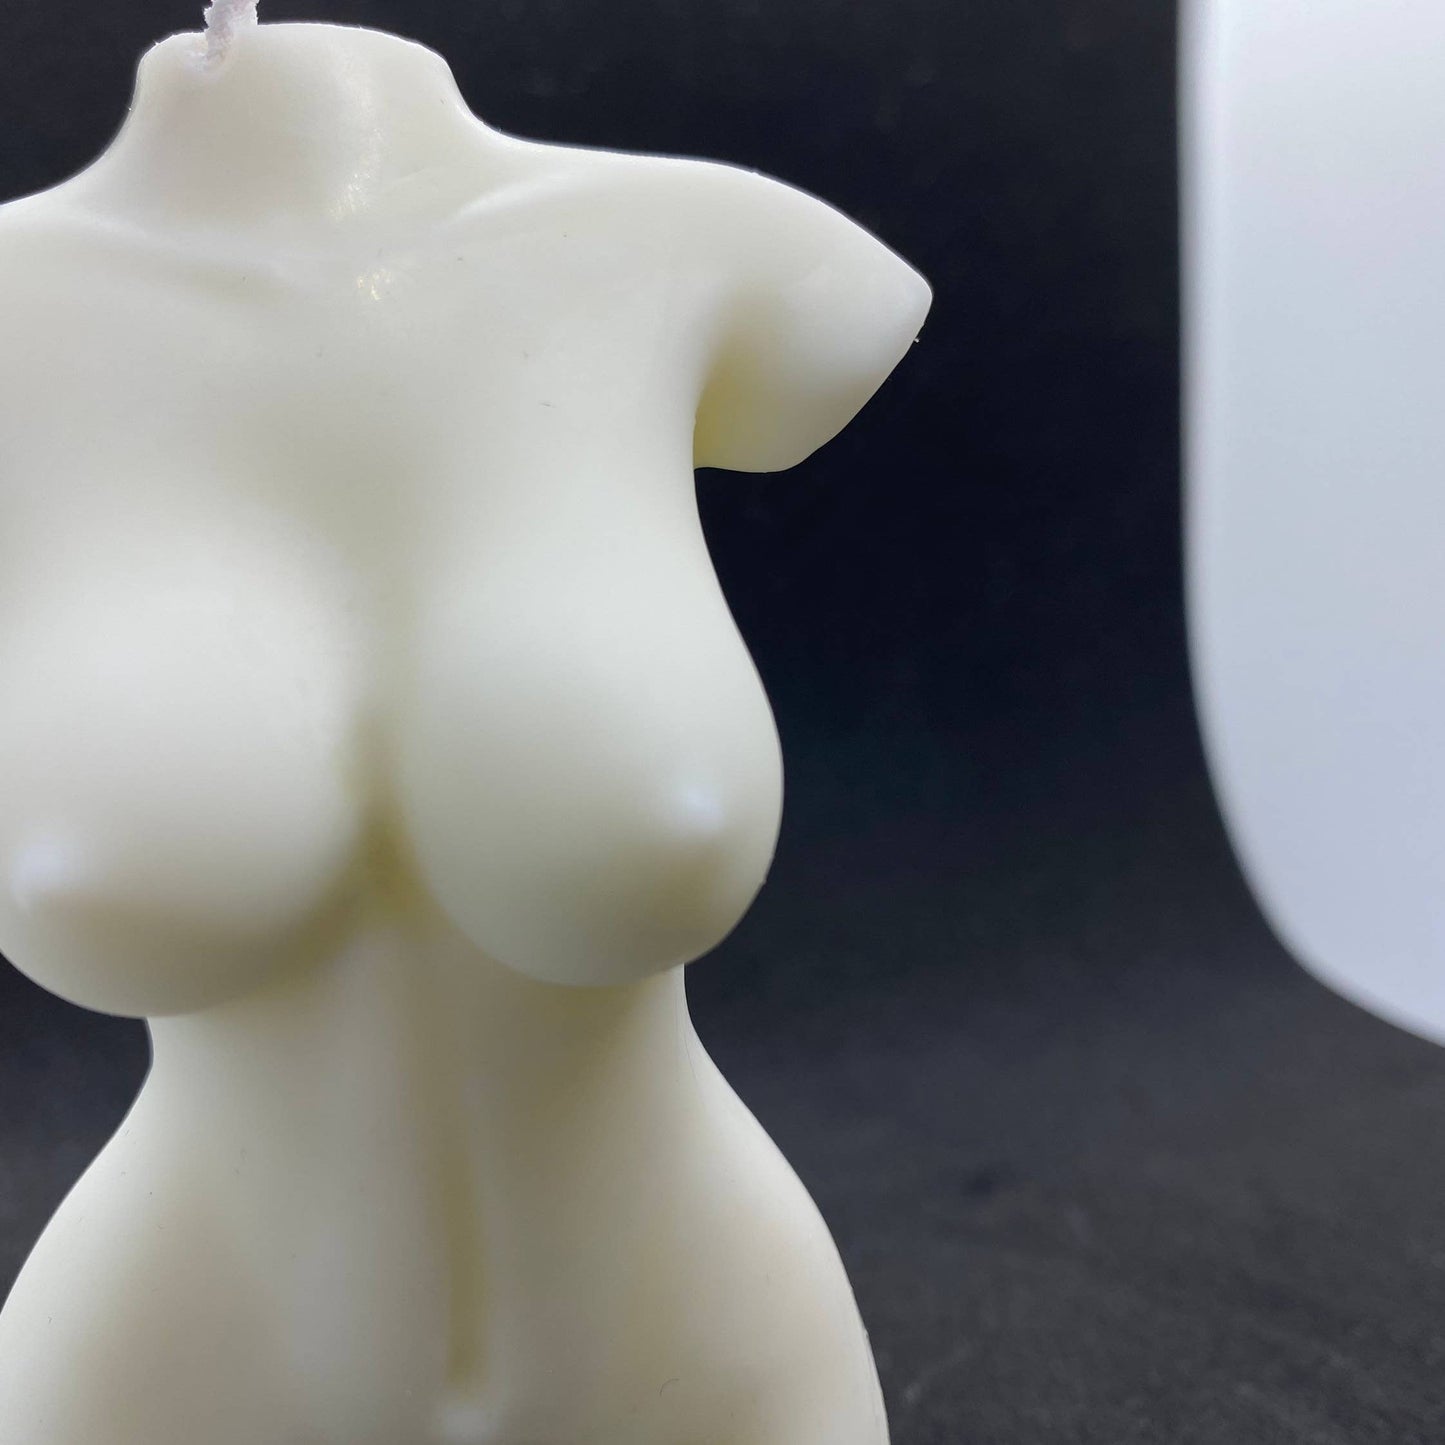 The Female body curves boob candle